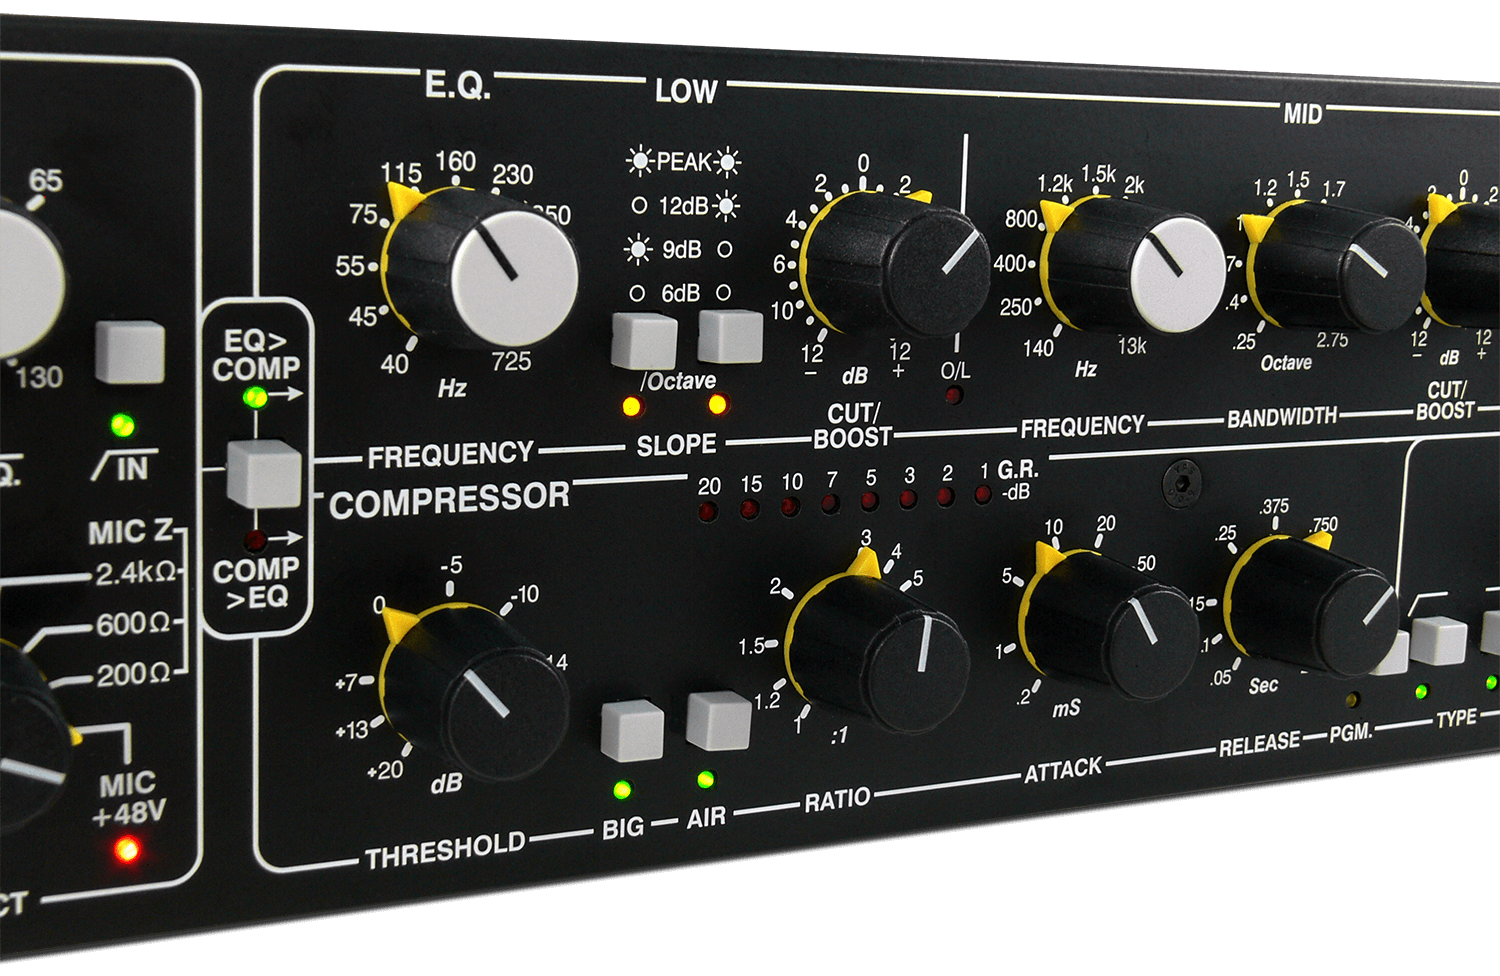 The EQ and Compressor controls of the 1977